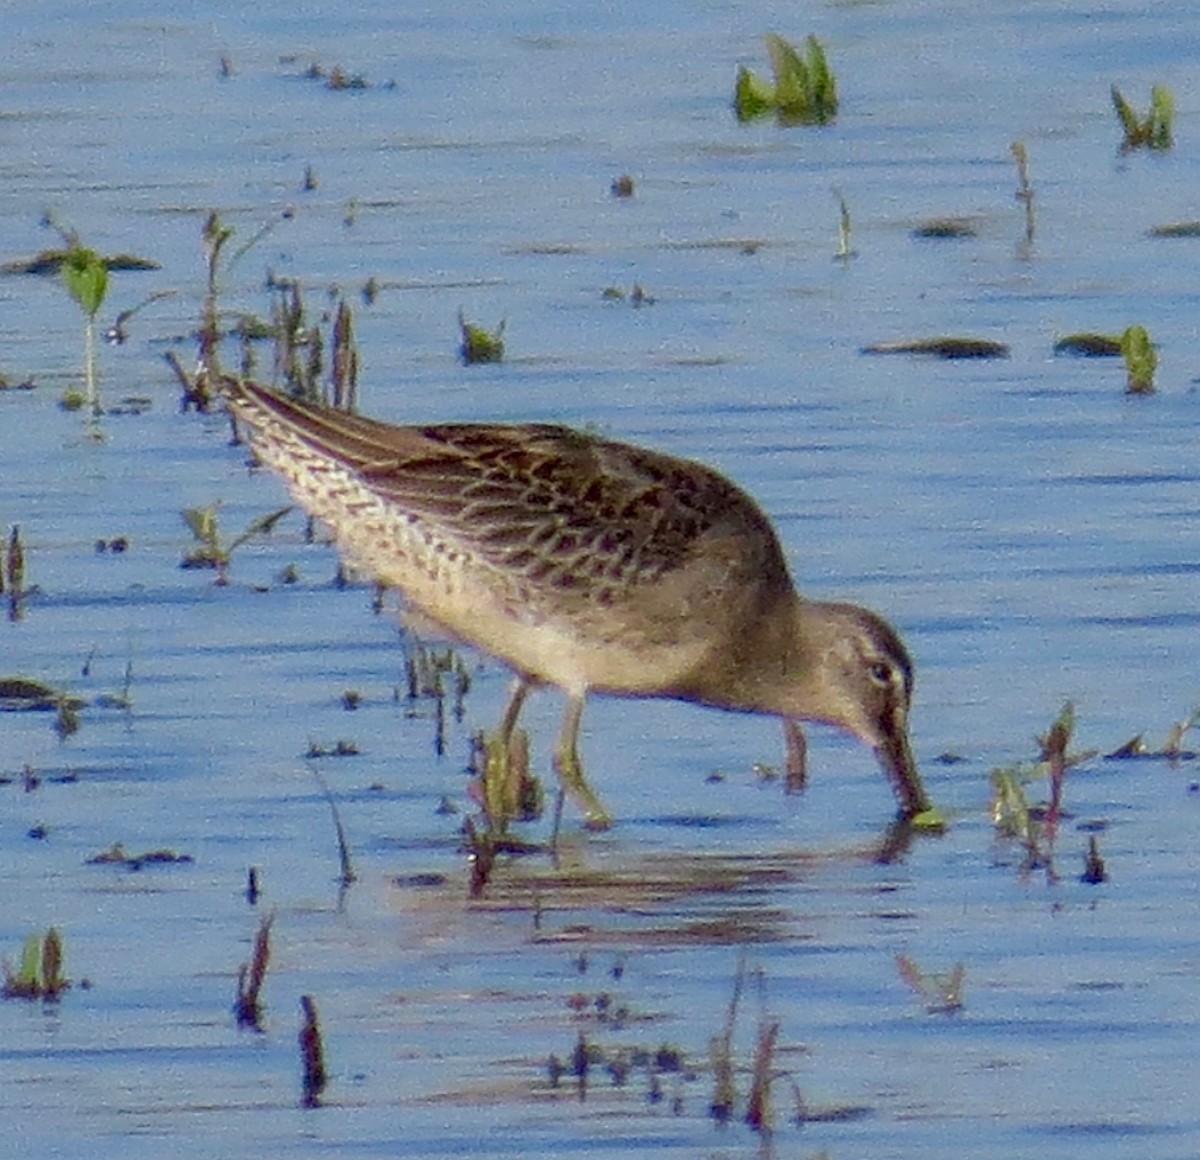 Long-billed Dowitcher - Don Glasco